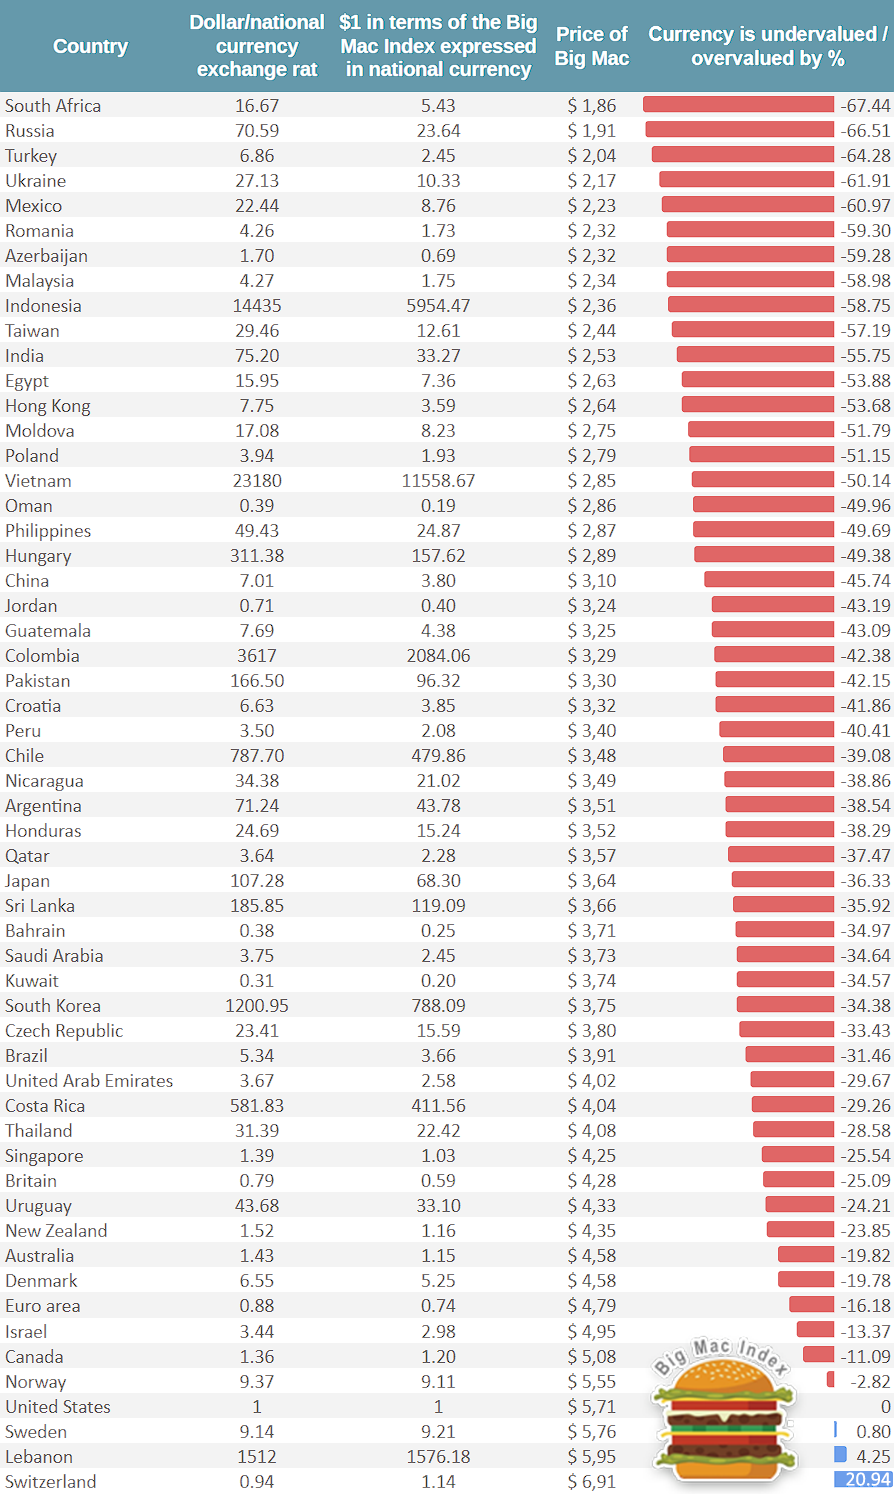 The Big Mac Index In 21 The World S Most Undervalued Currencies Table Fxssi Forex Sentiment Board